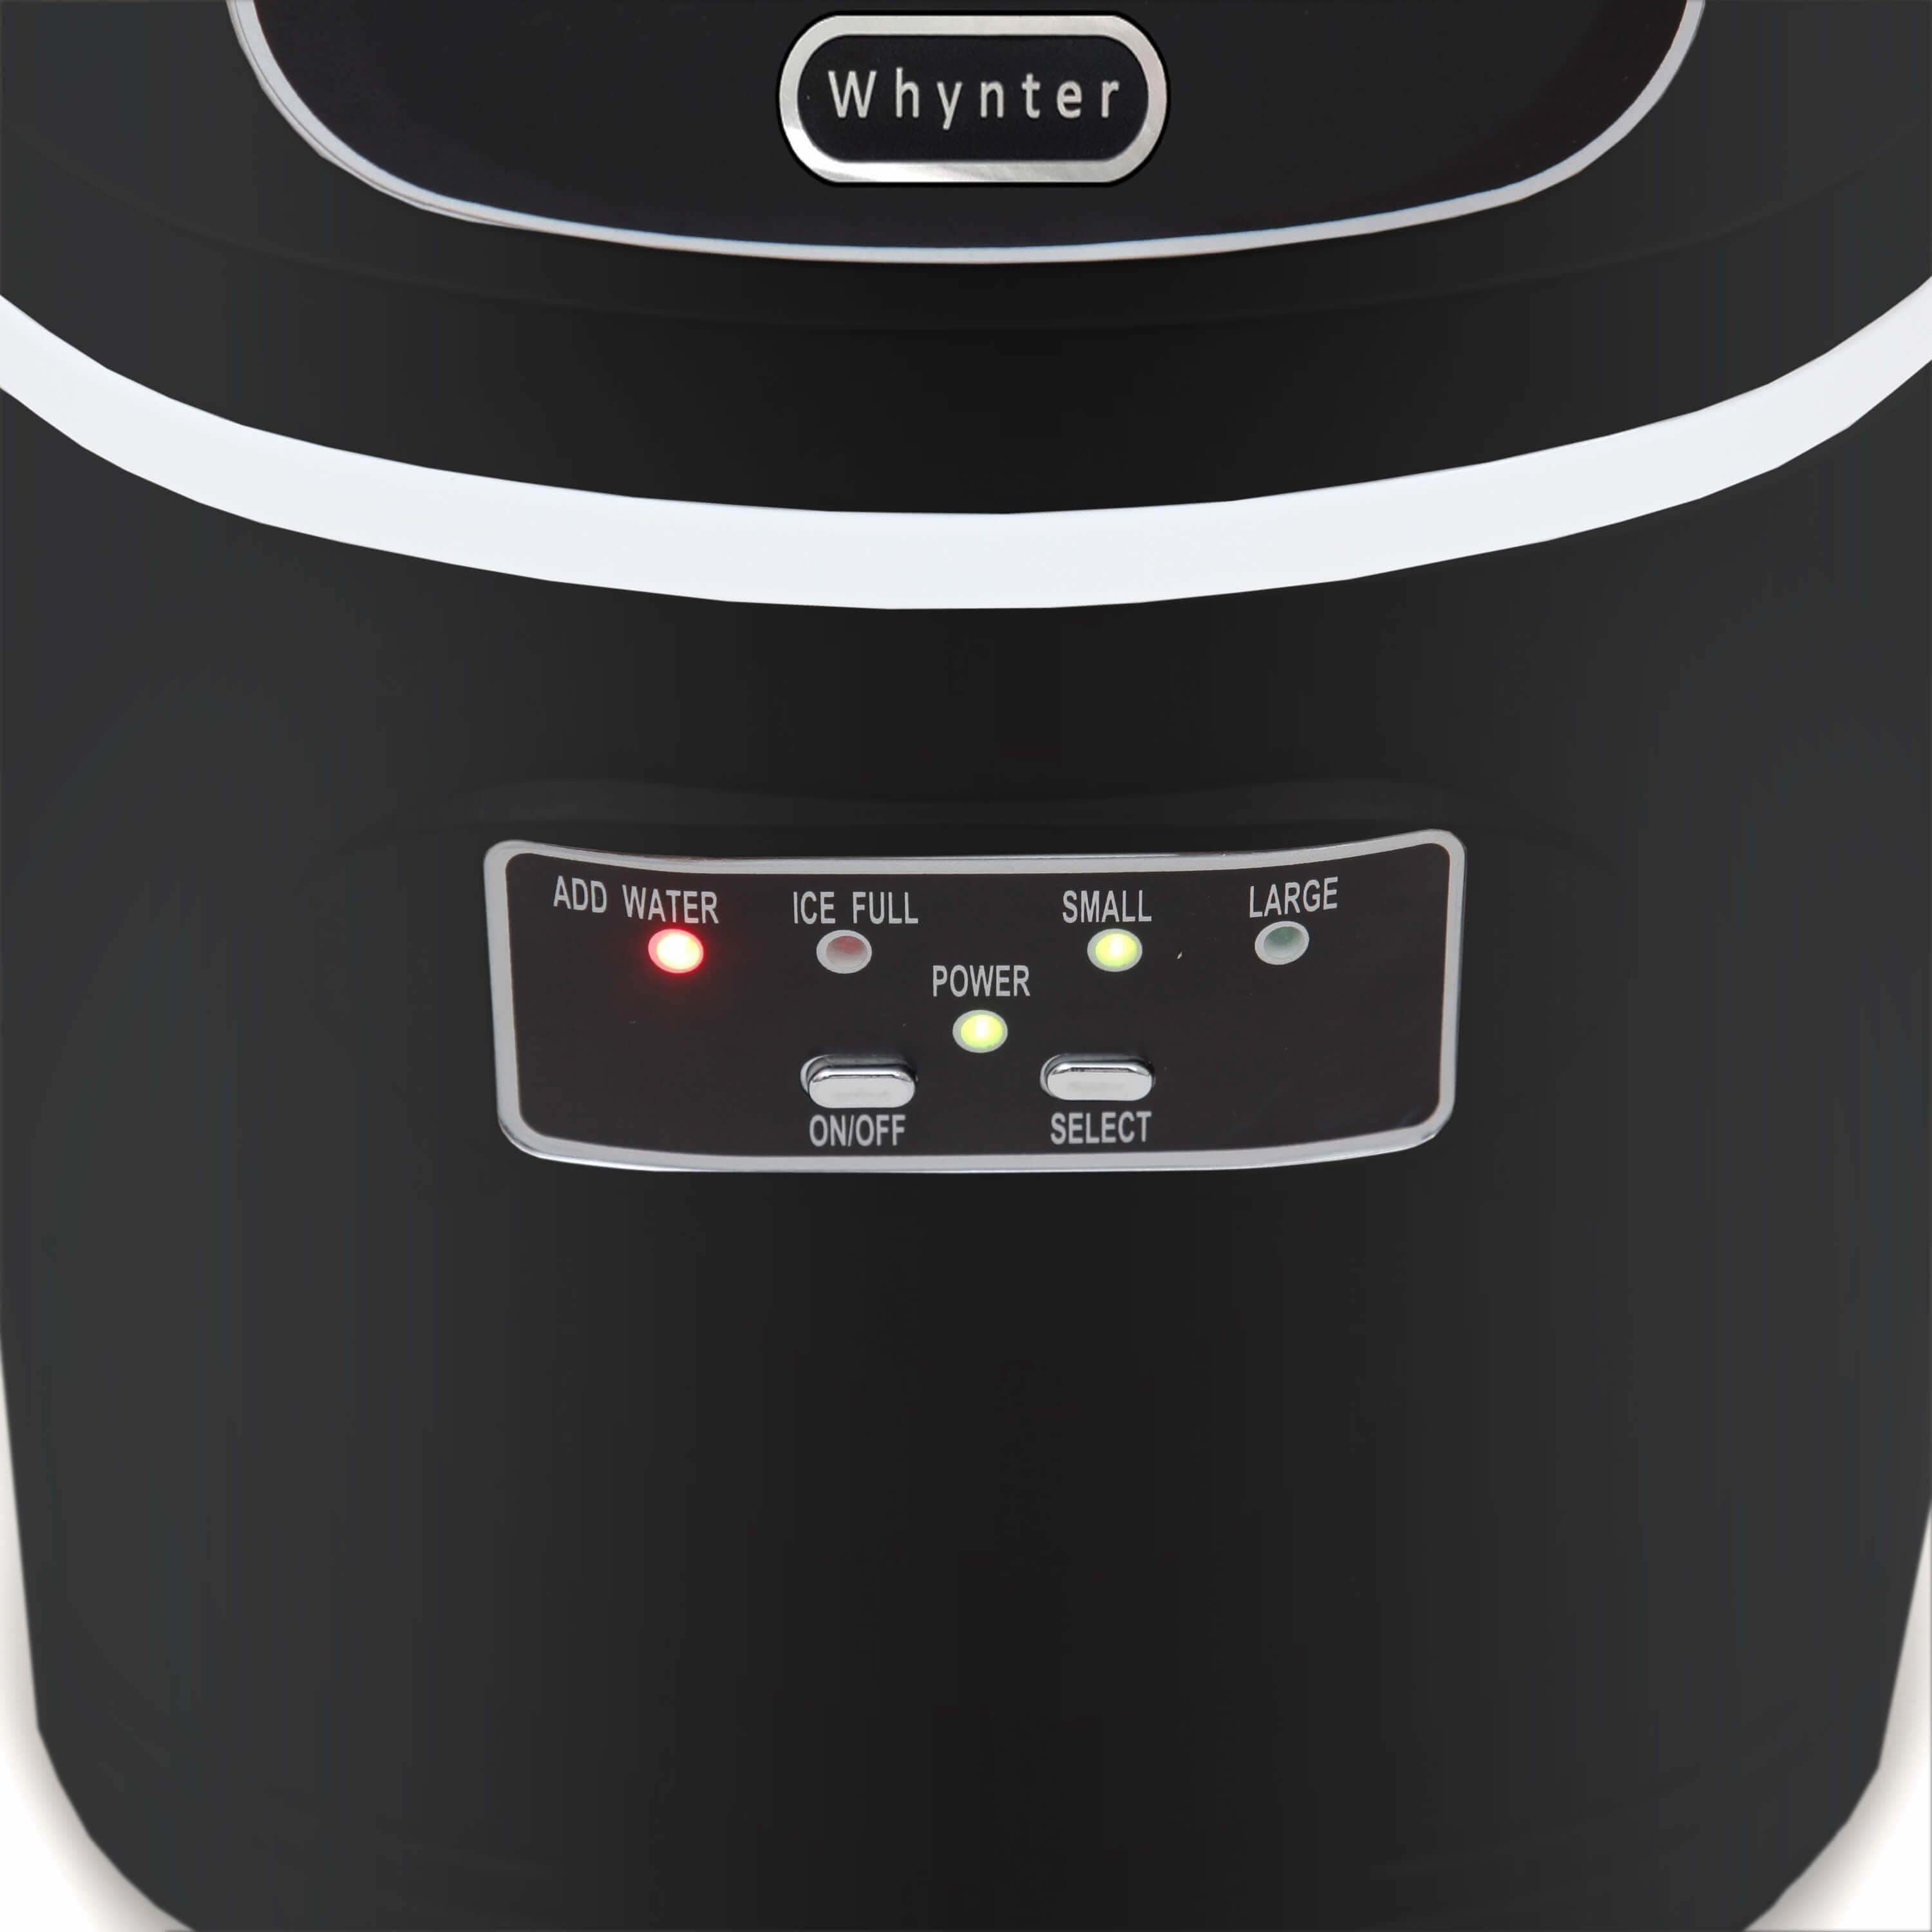 Whynter Compact Portable Ice Maker 27 lb capacity Black IMC-270MB Portable/Counter Top Ice Makers IMC-270MB Luxury Appliances Direct